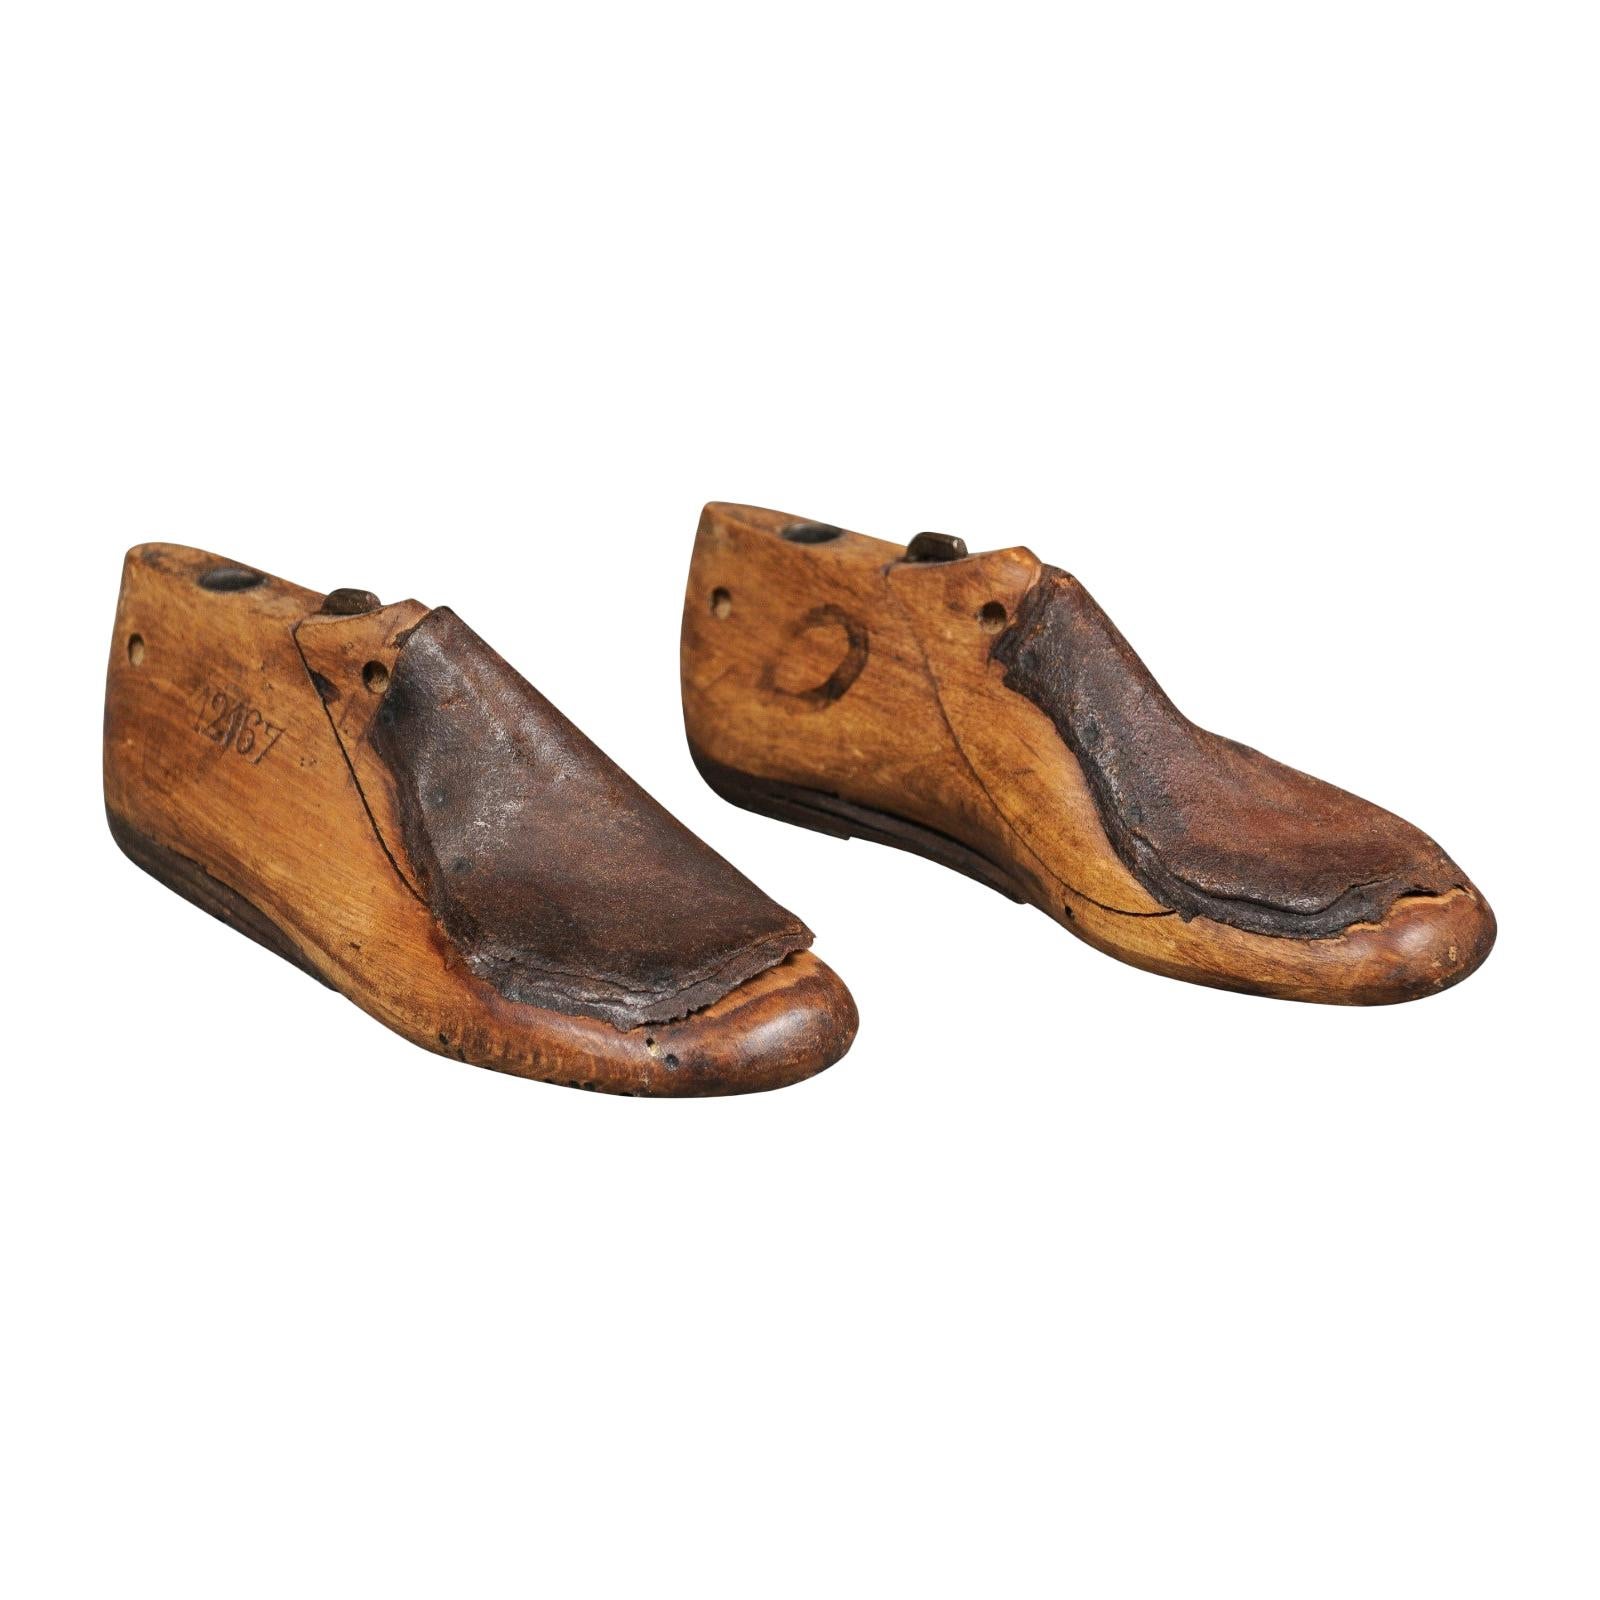 Pair of English Vintage Wood and Leather Handmade Cobbler's Shoe Lasts